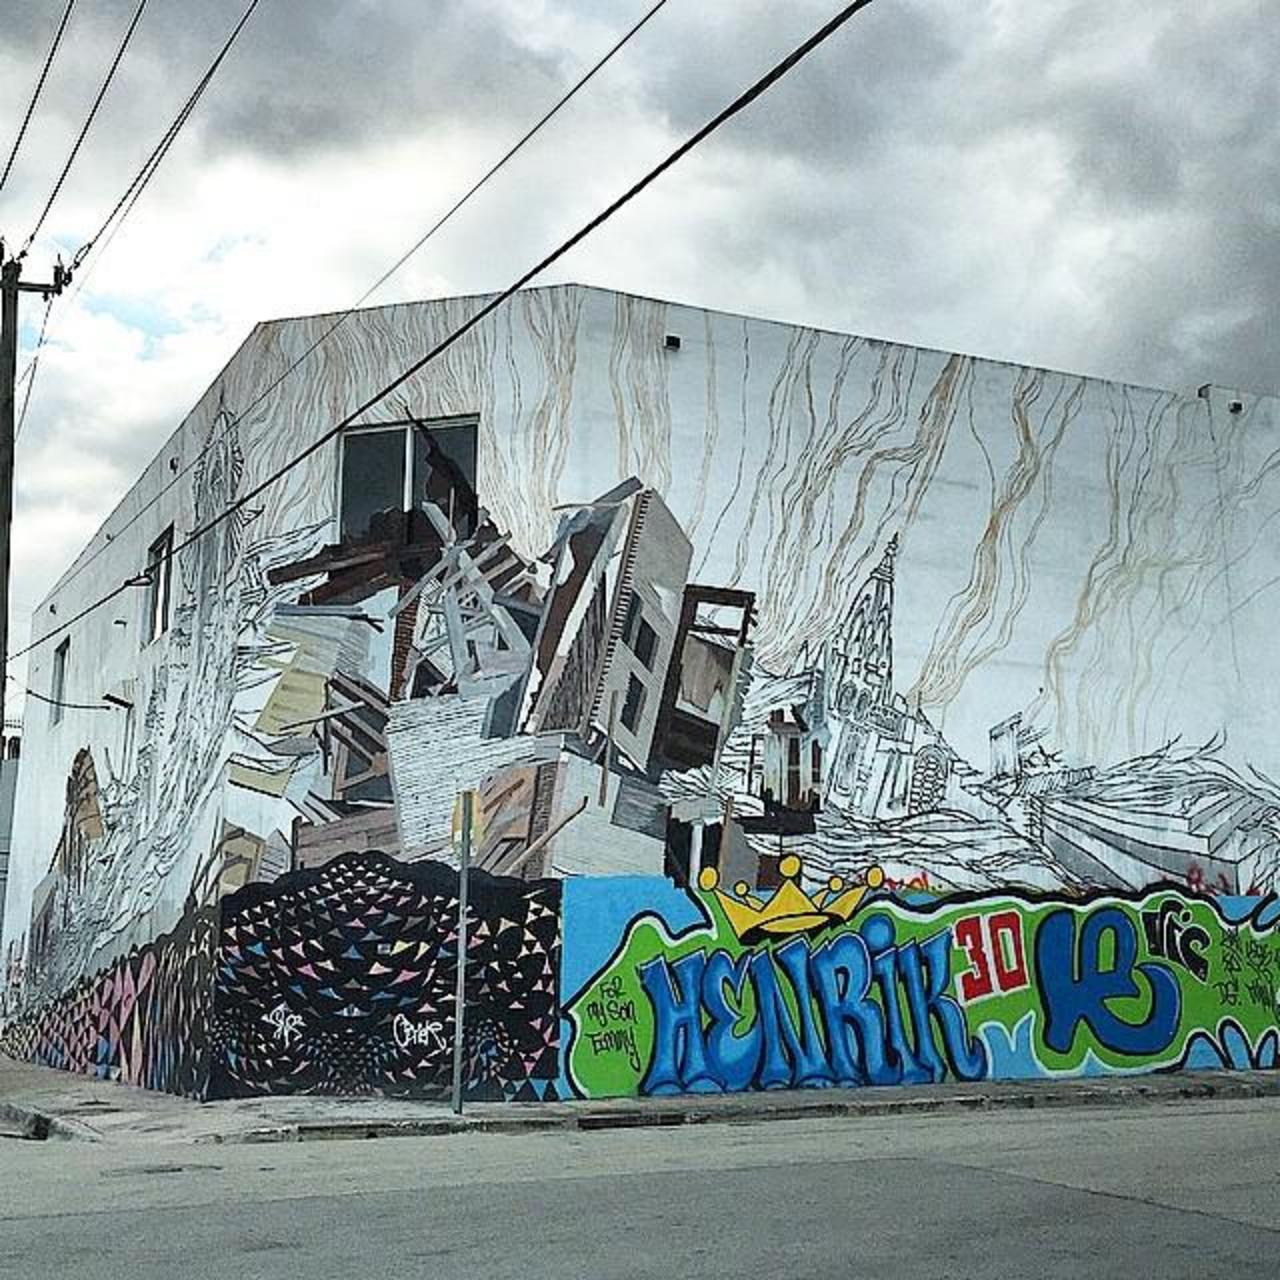 #wynwood #streetartwynwood #streetart #streetartmiami #graffiti #mural #iphoneography by mariabongiovani http://t.co/Woj39ZRx1a